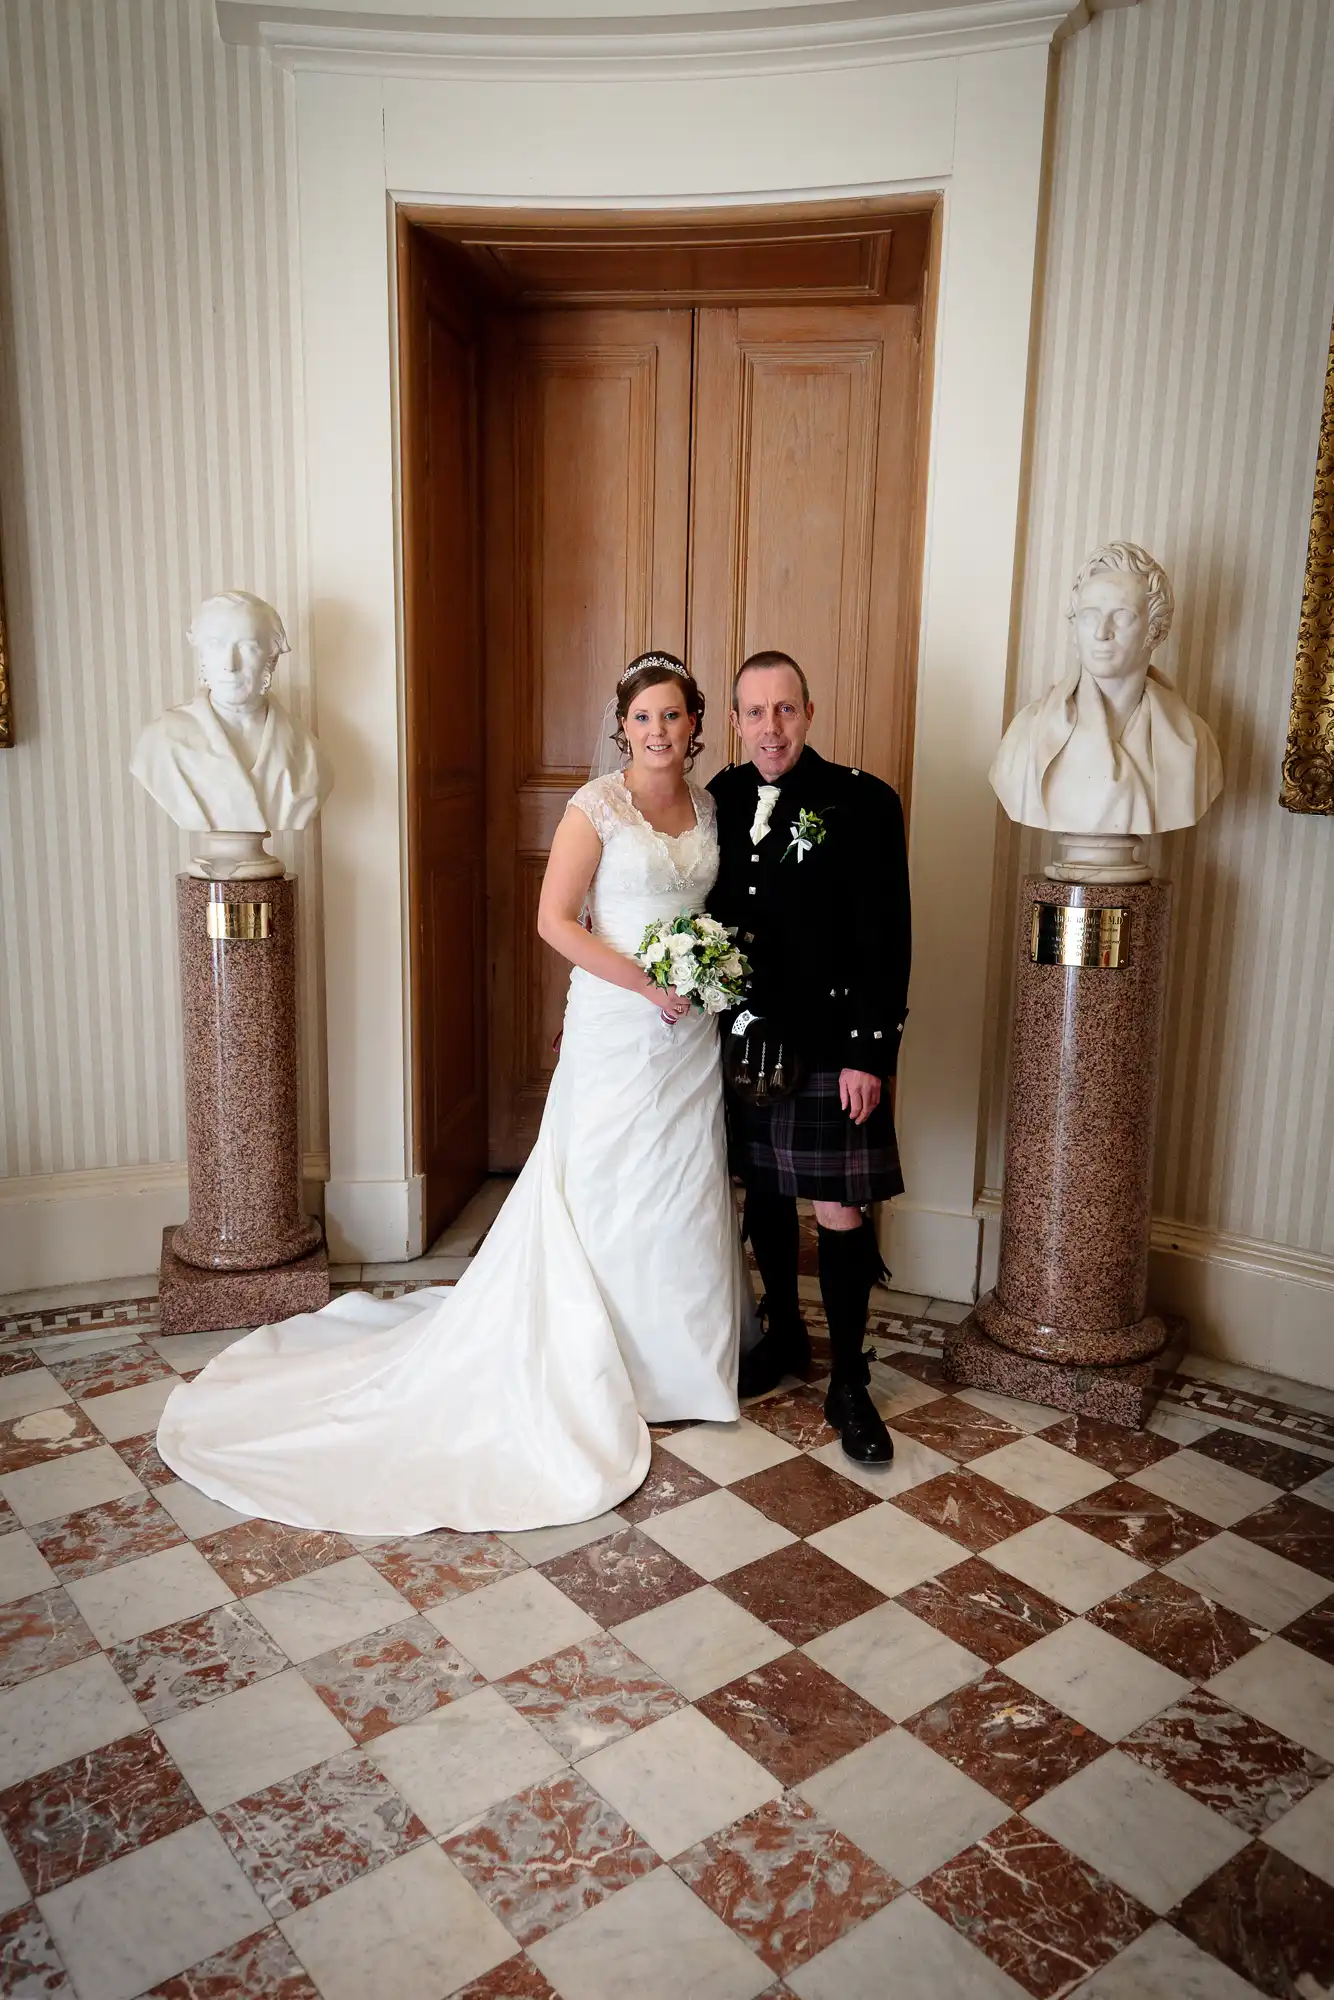 A bride in a white dress and a groom in a kilt posing together between two bust sculptures in an elegant room with striped wallpaper and a tiled floor.